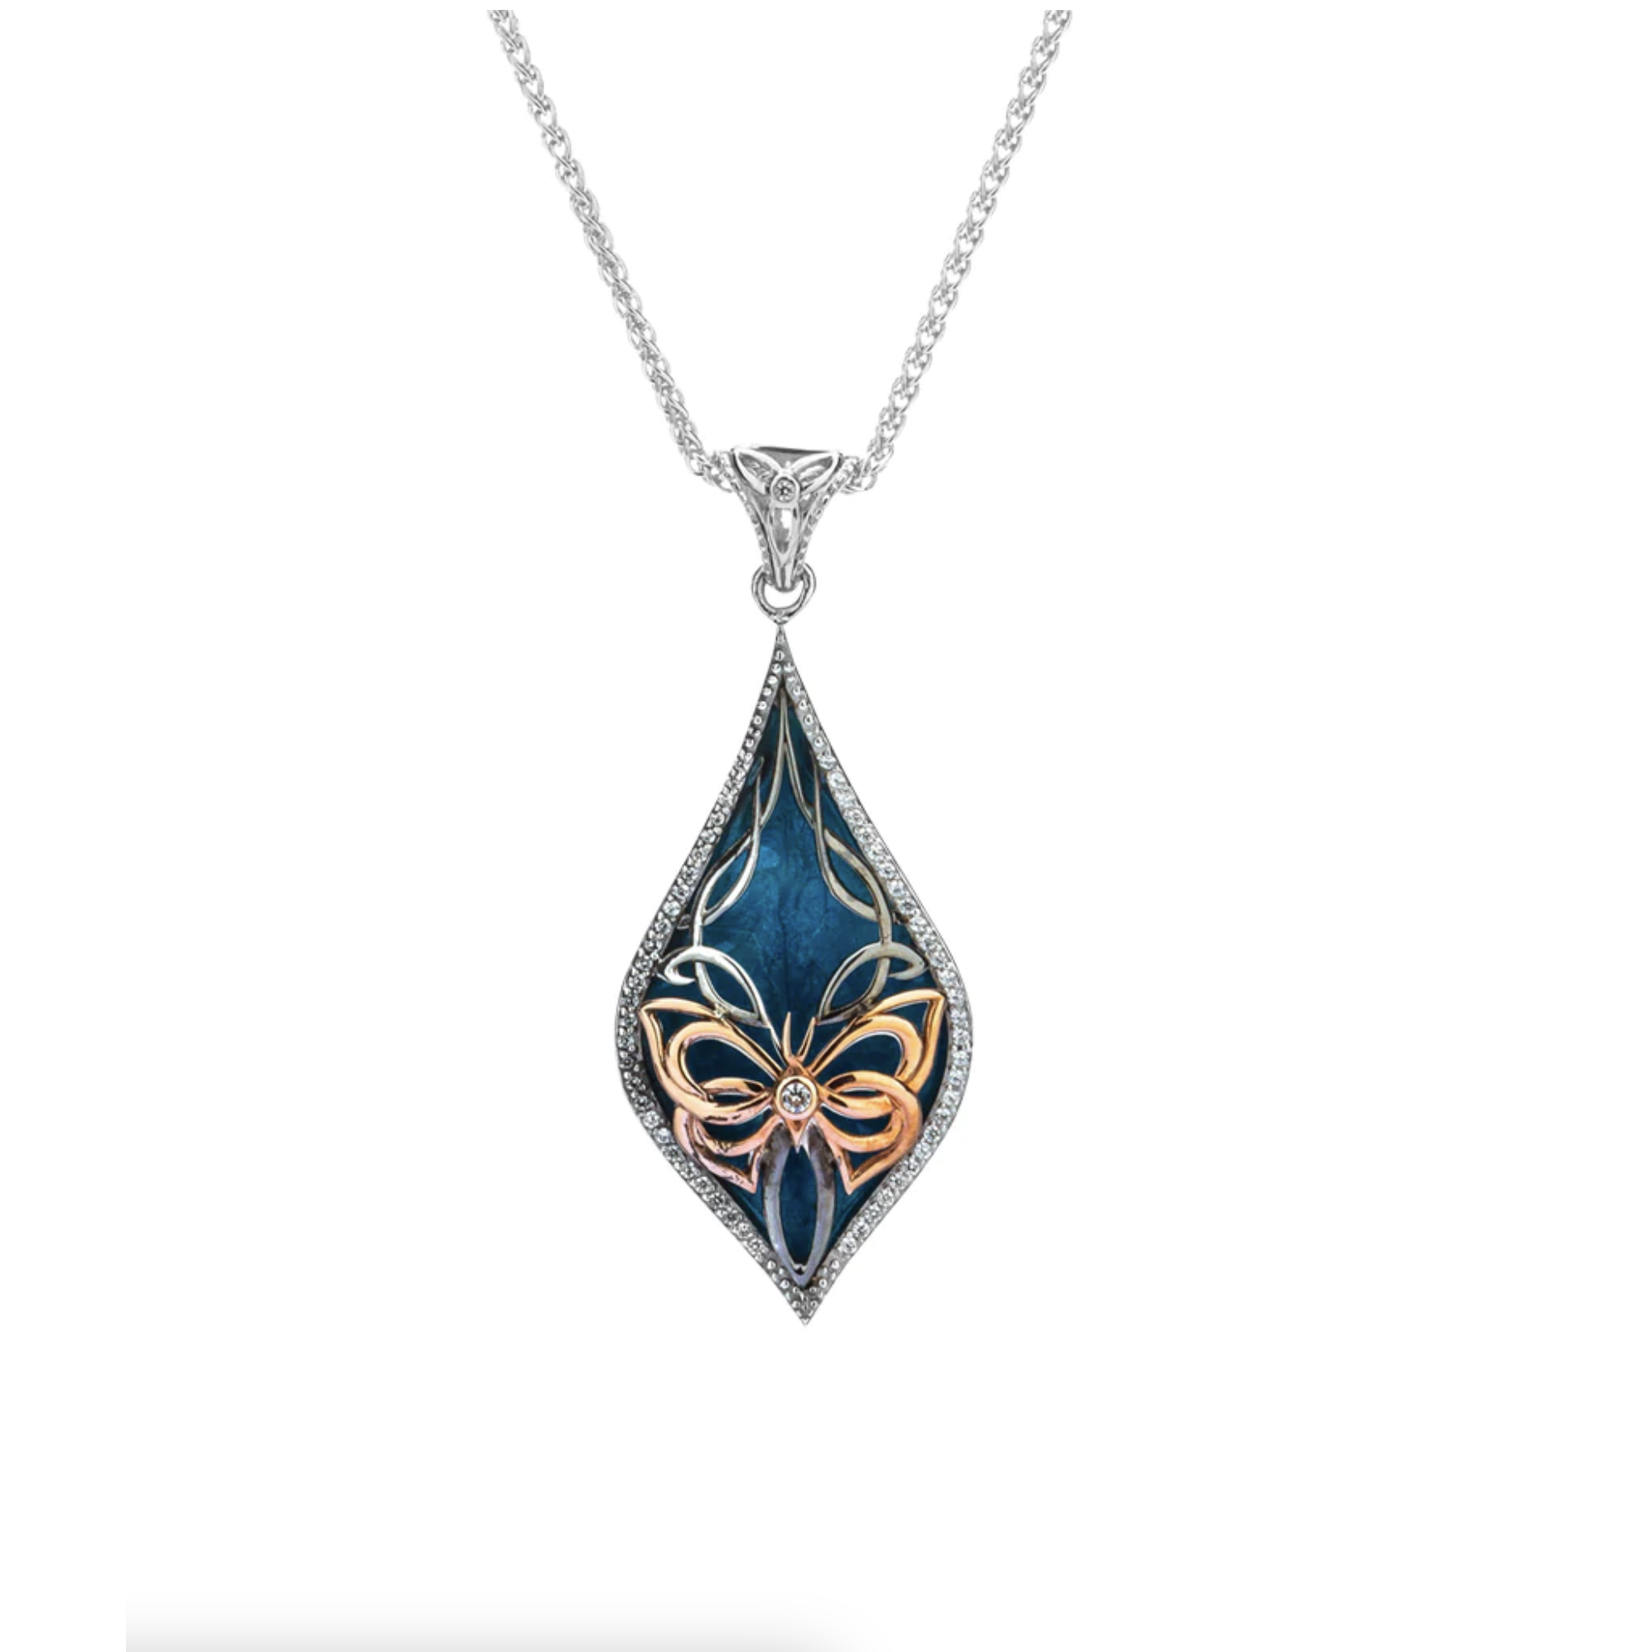 Keith Jack Silver and 10K Rose Gold Cocooned Butterfly Enamel Necklace